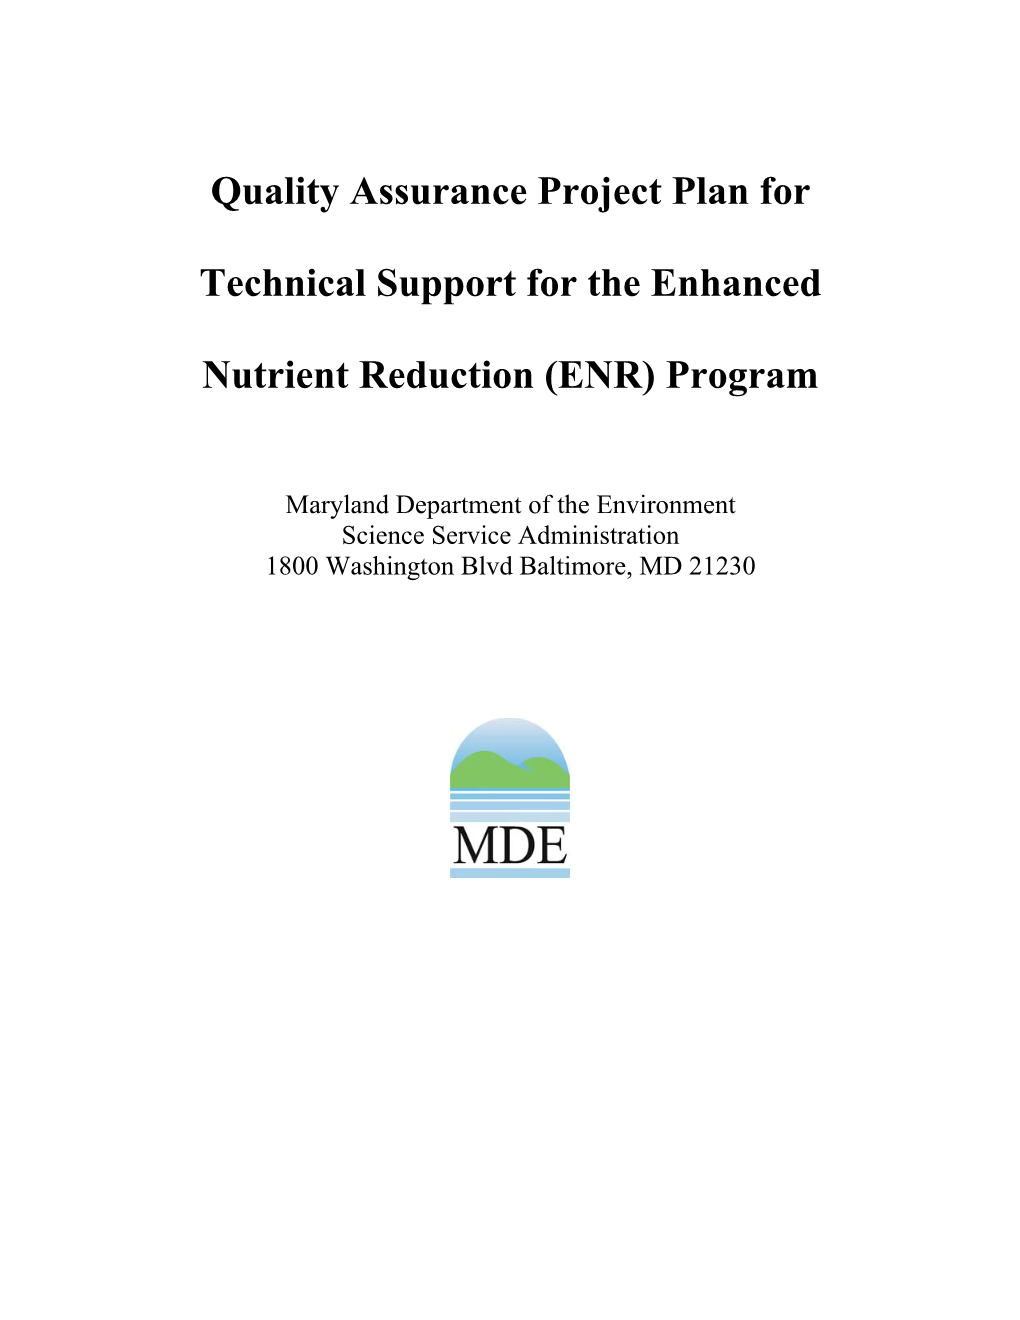 Quality Assurance Project Plan for Technical Support for the Enhanced Nutrient Reduction (ENR) Program